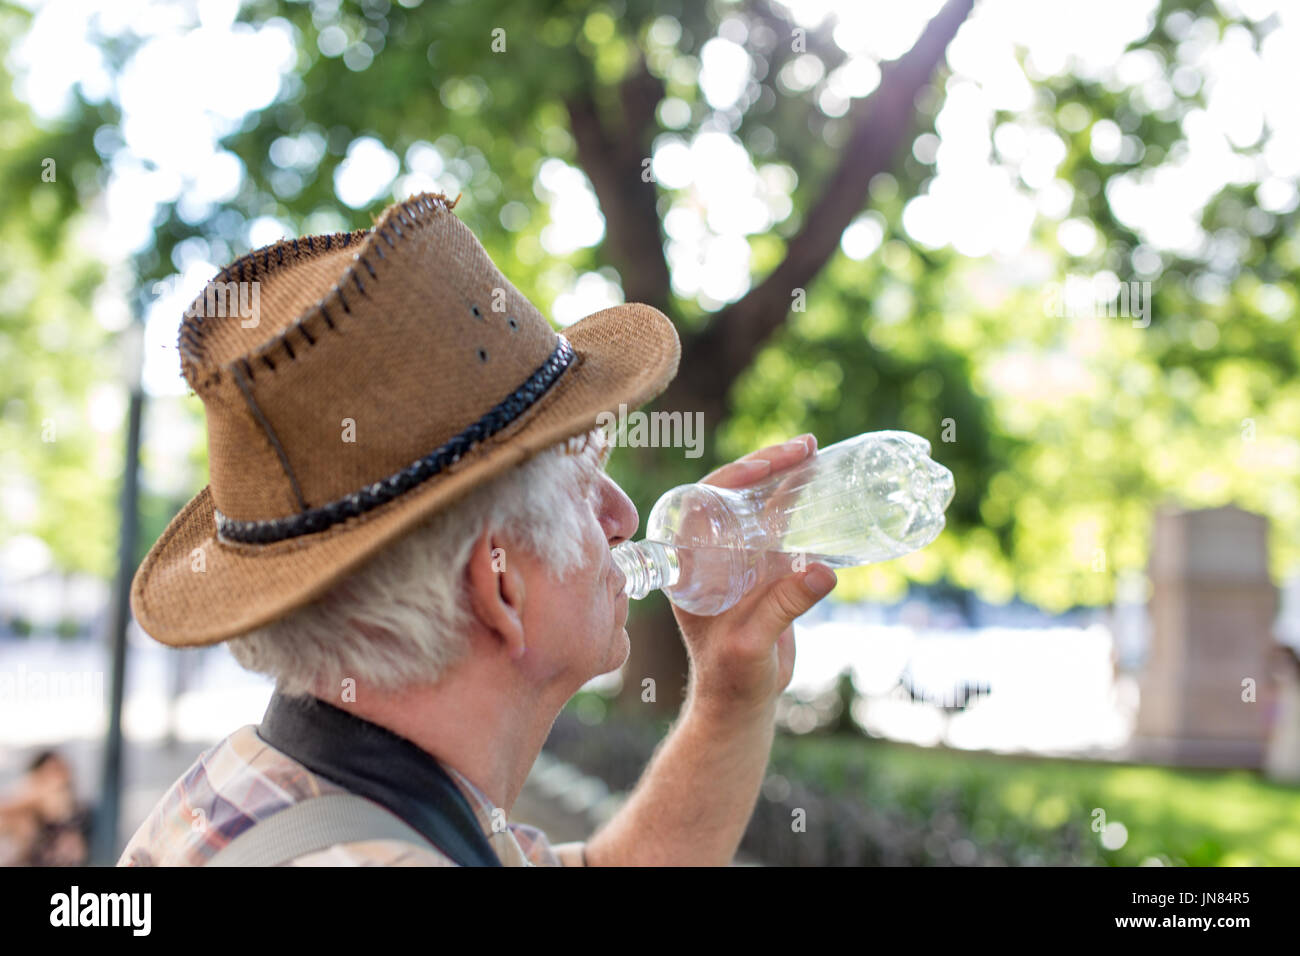 Senior thirsty tourist man drinking water from bottle in park Stock Photo